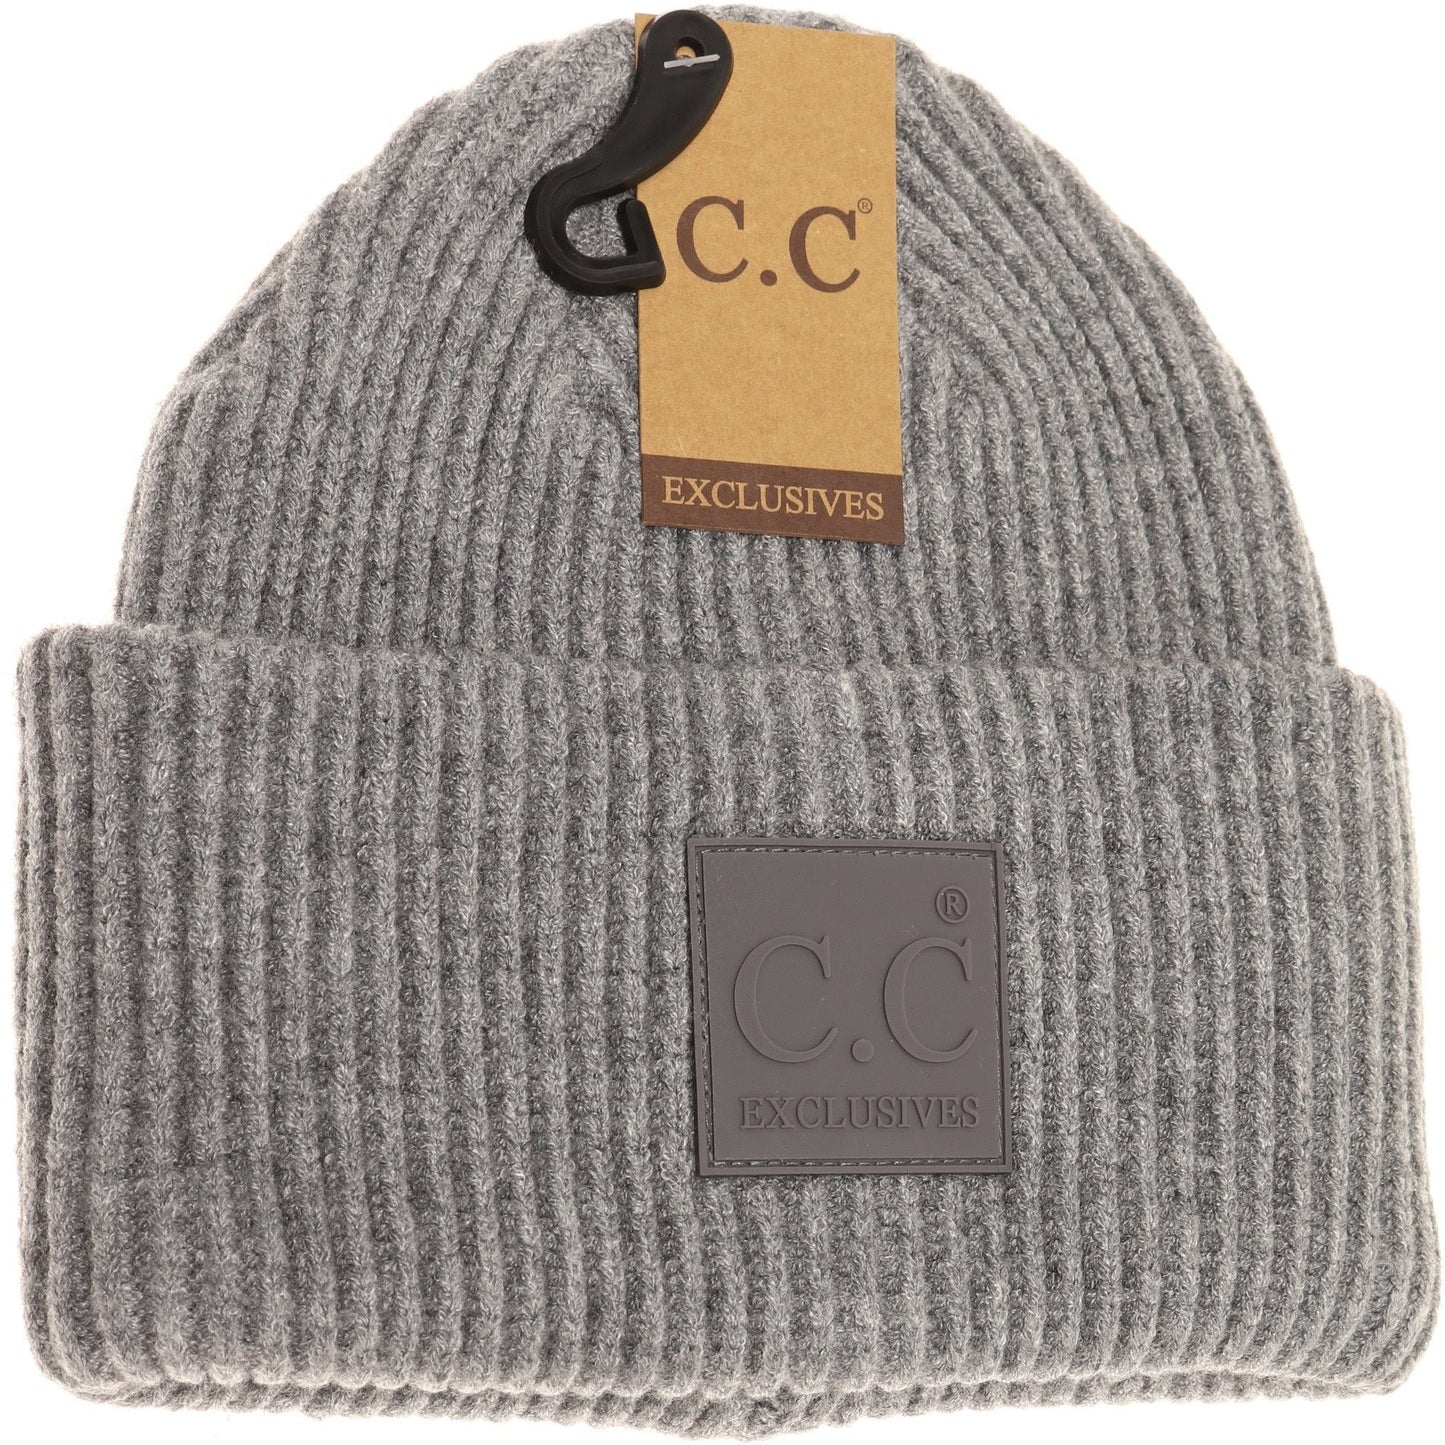 Solid Ribbed CC Beanie with Rubber Patch - Lt Grey